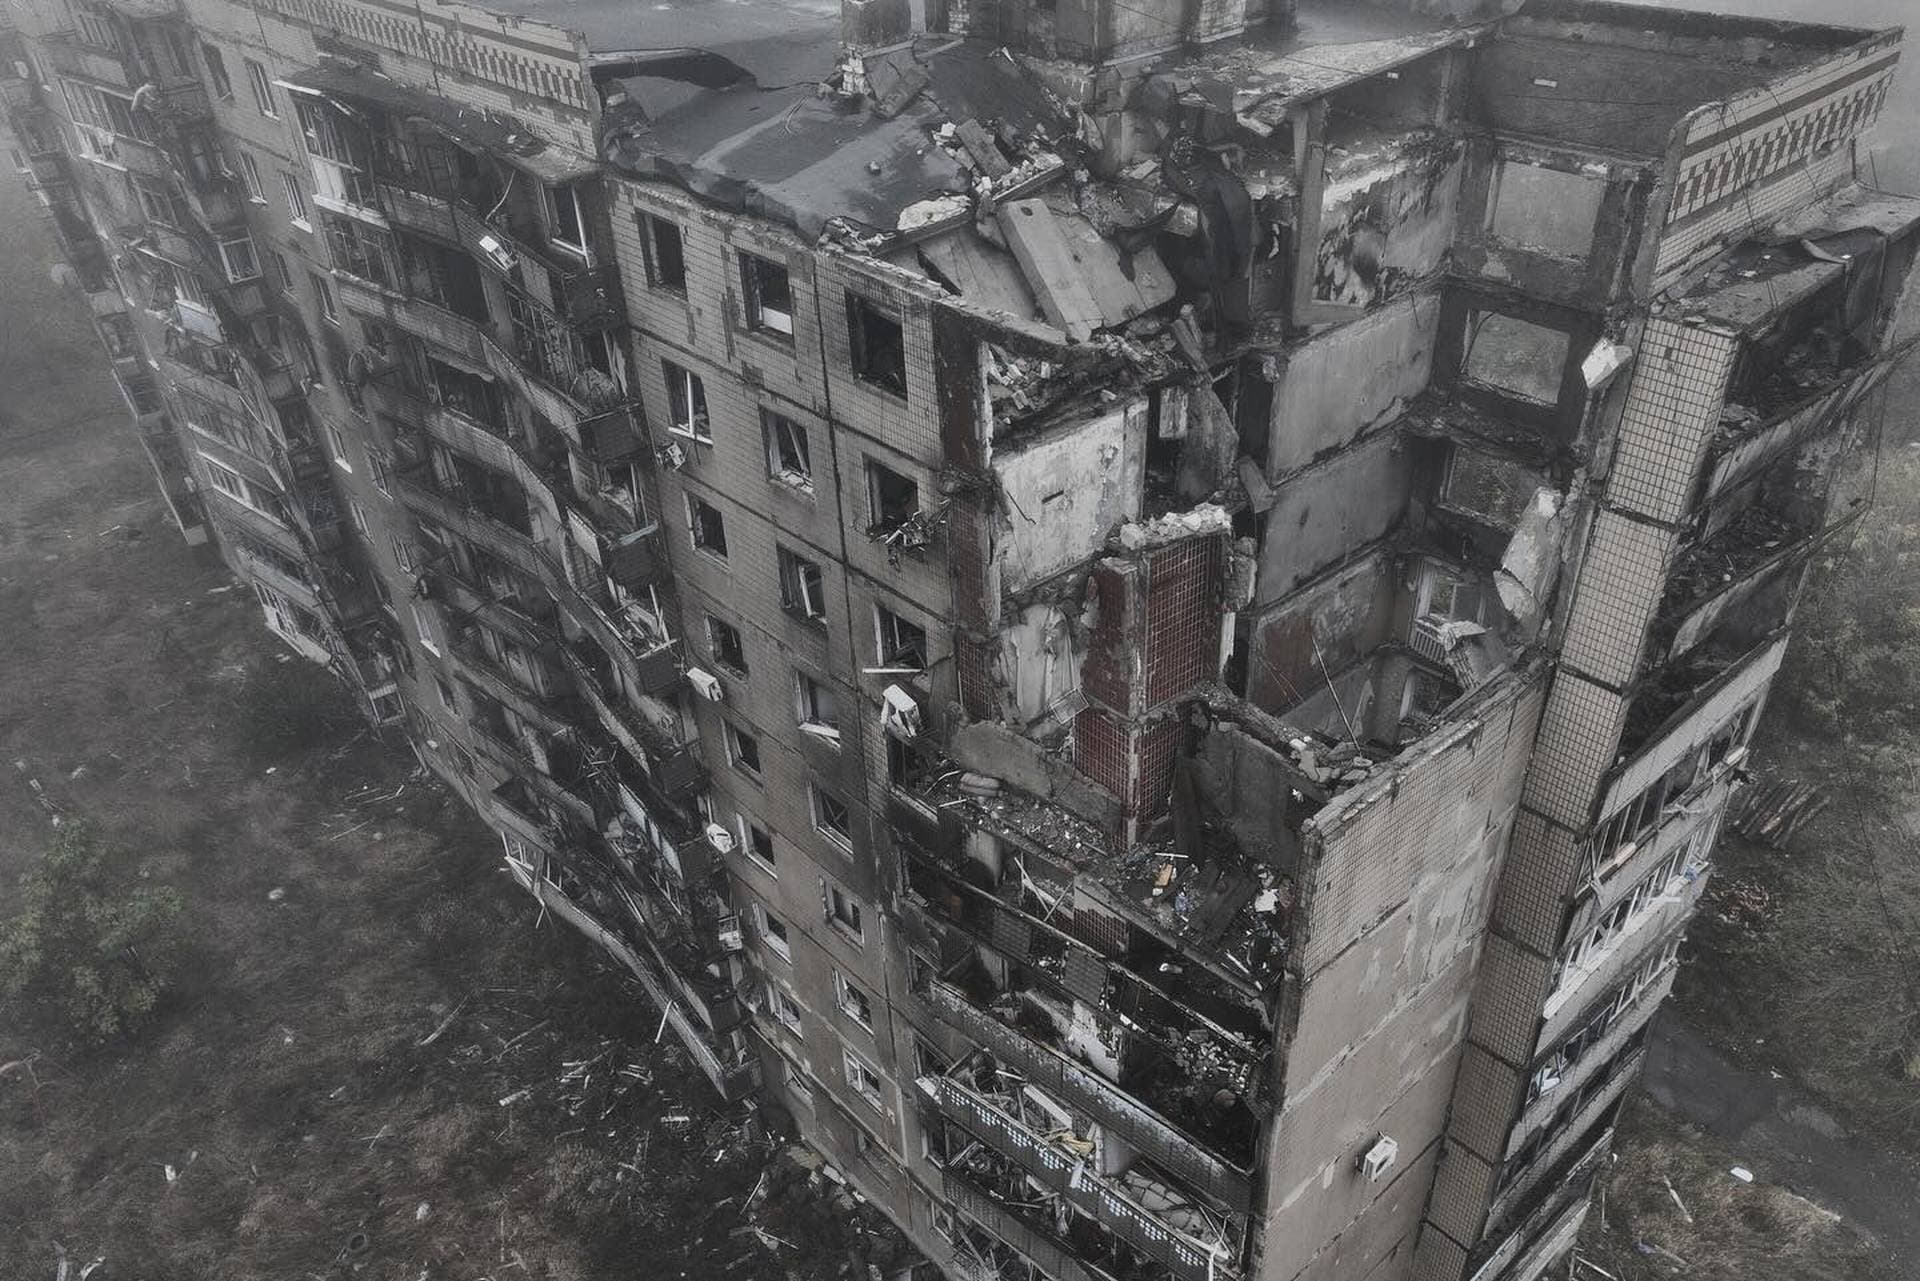 Avdiivka is being razed to the ground